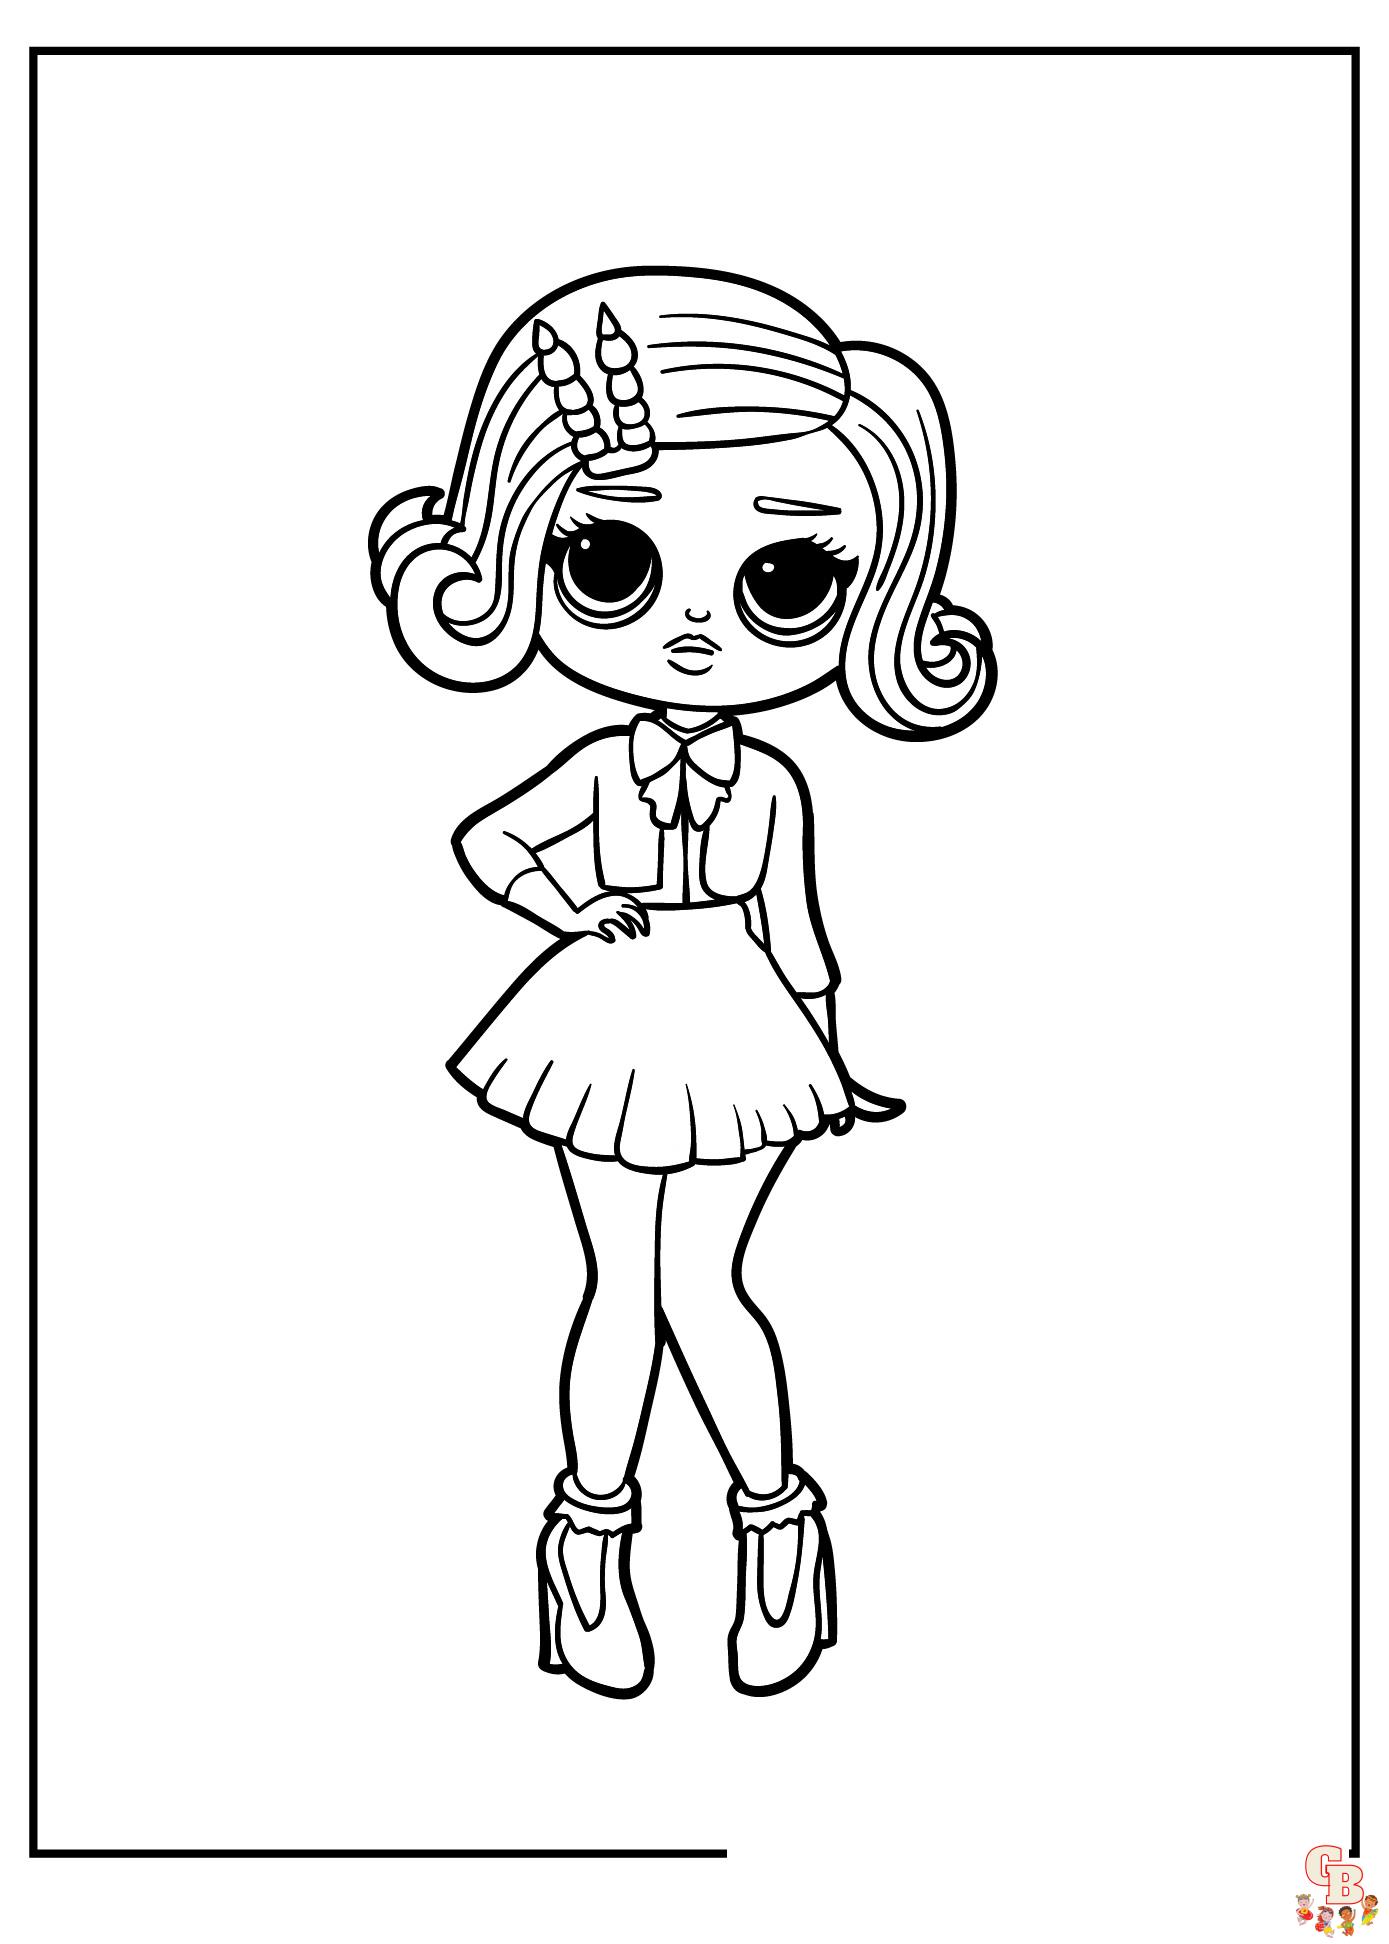 OMG Coloring Pages